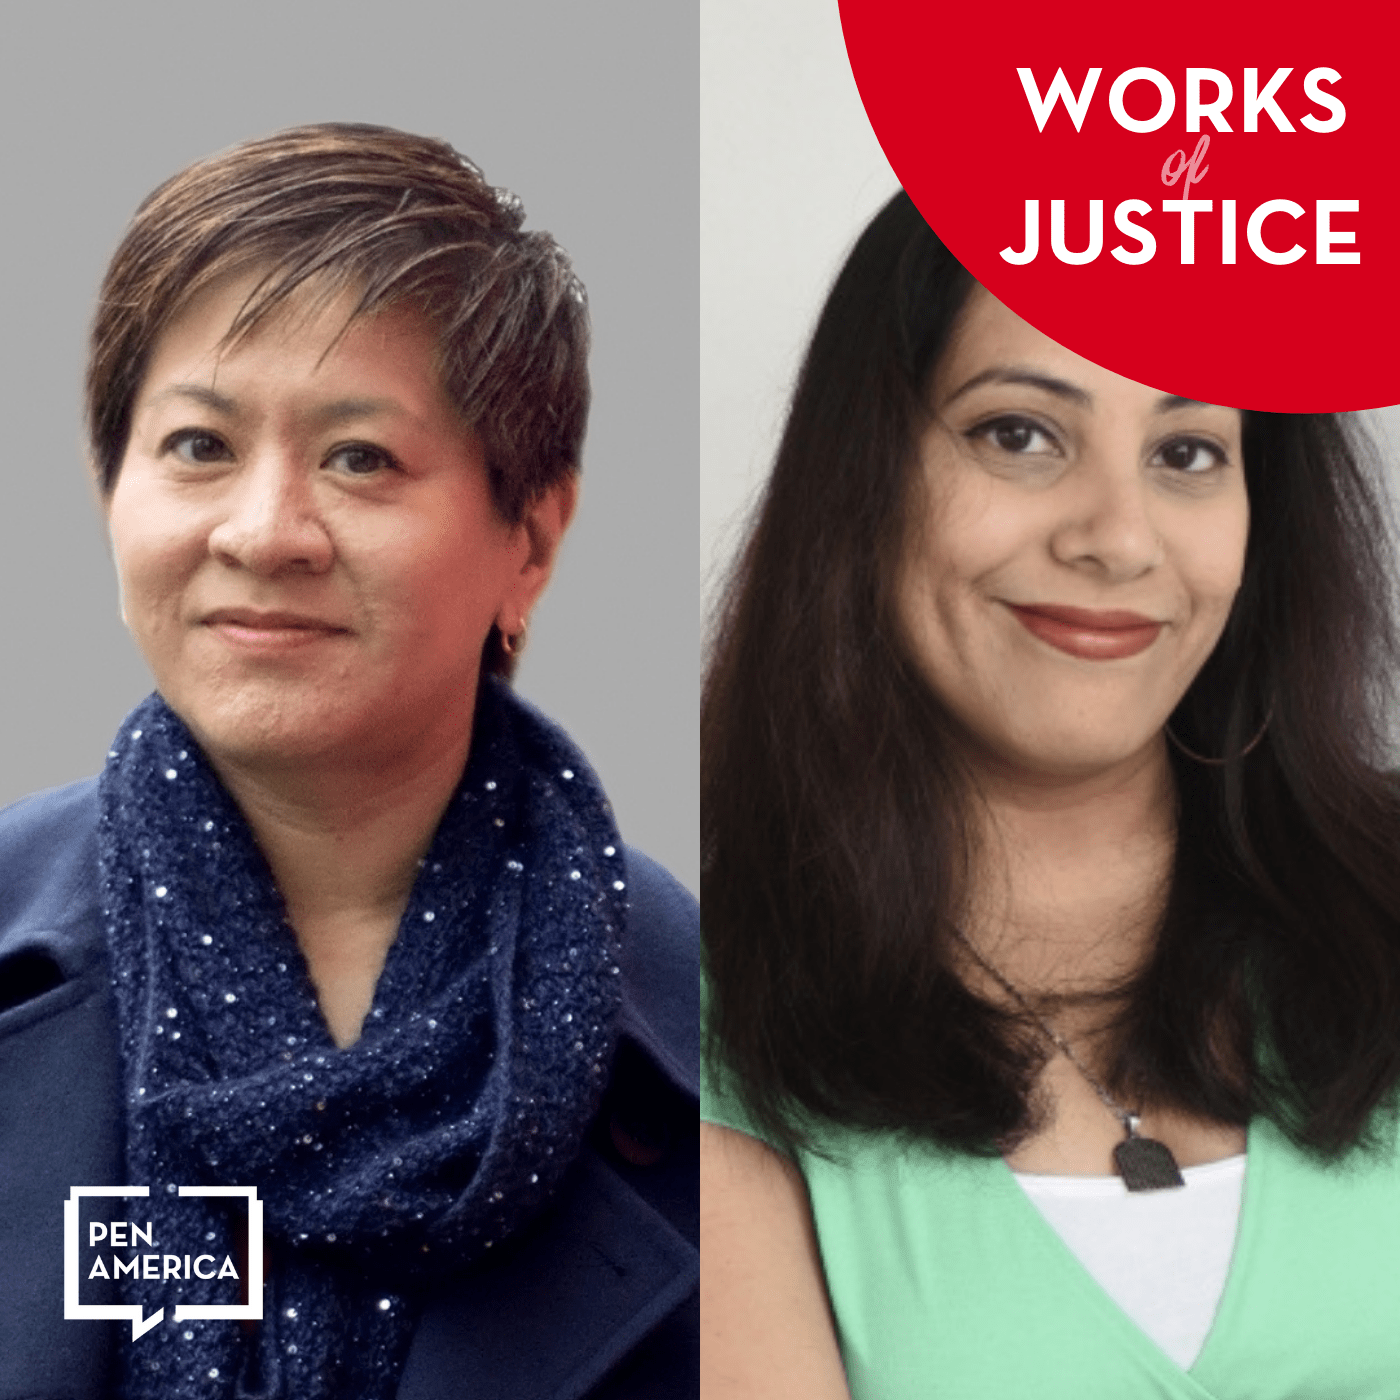 Works of Justice Podcast graphic with headshots of Yukari Kane and Shaheen Pasha